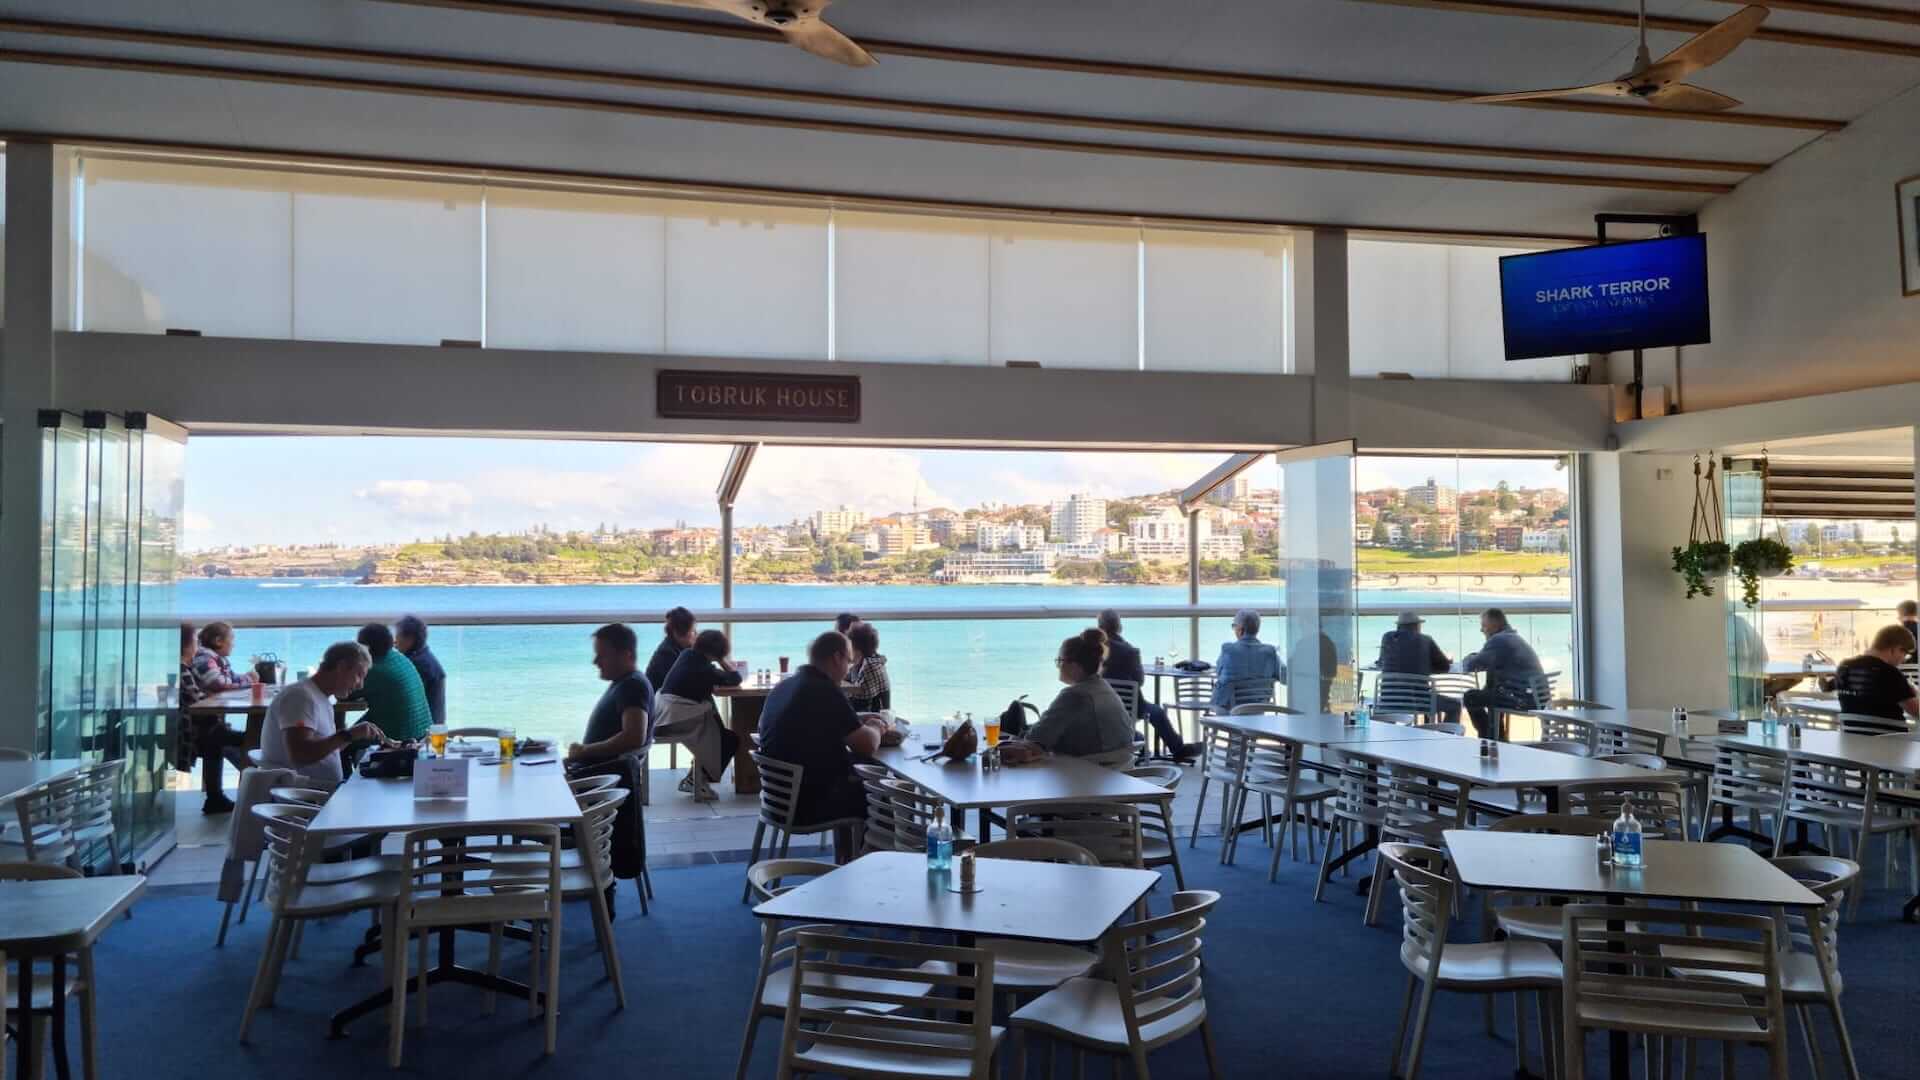 A view of the beach from north bondi rsl - one of the best pubs in Sydney.